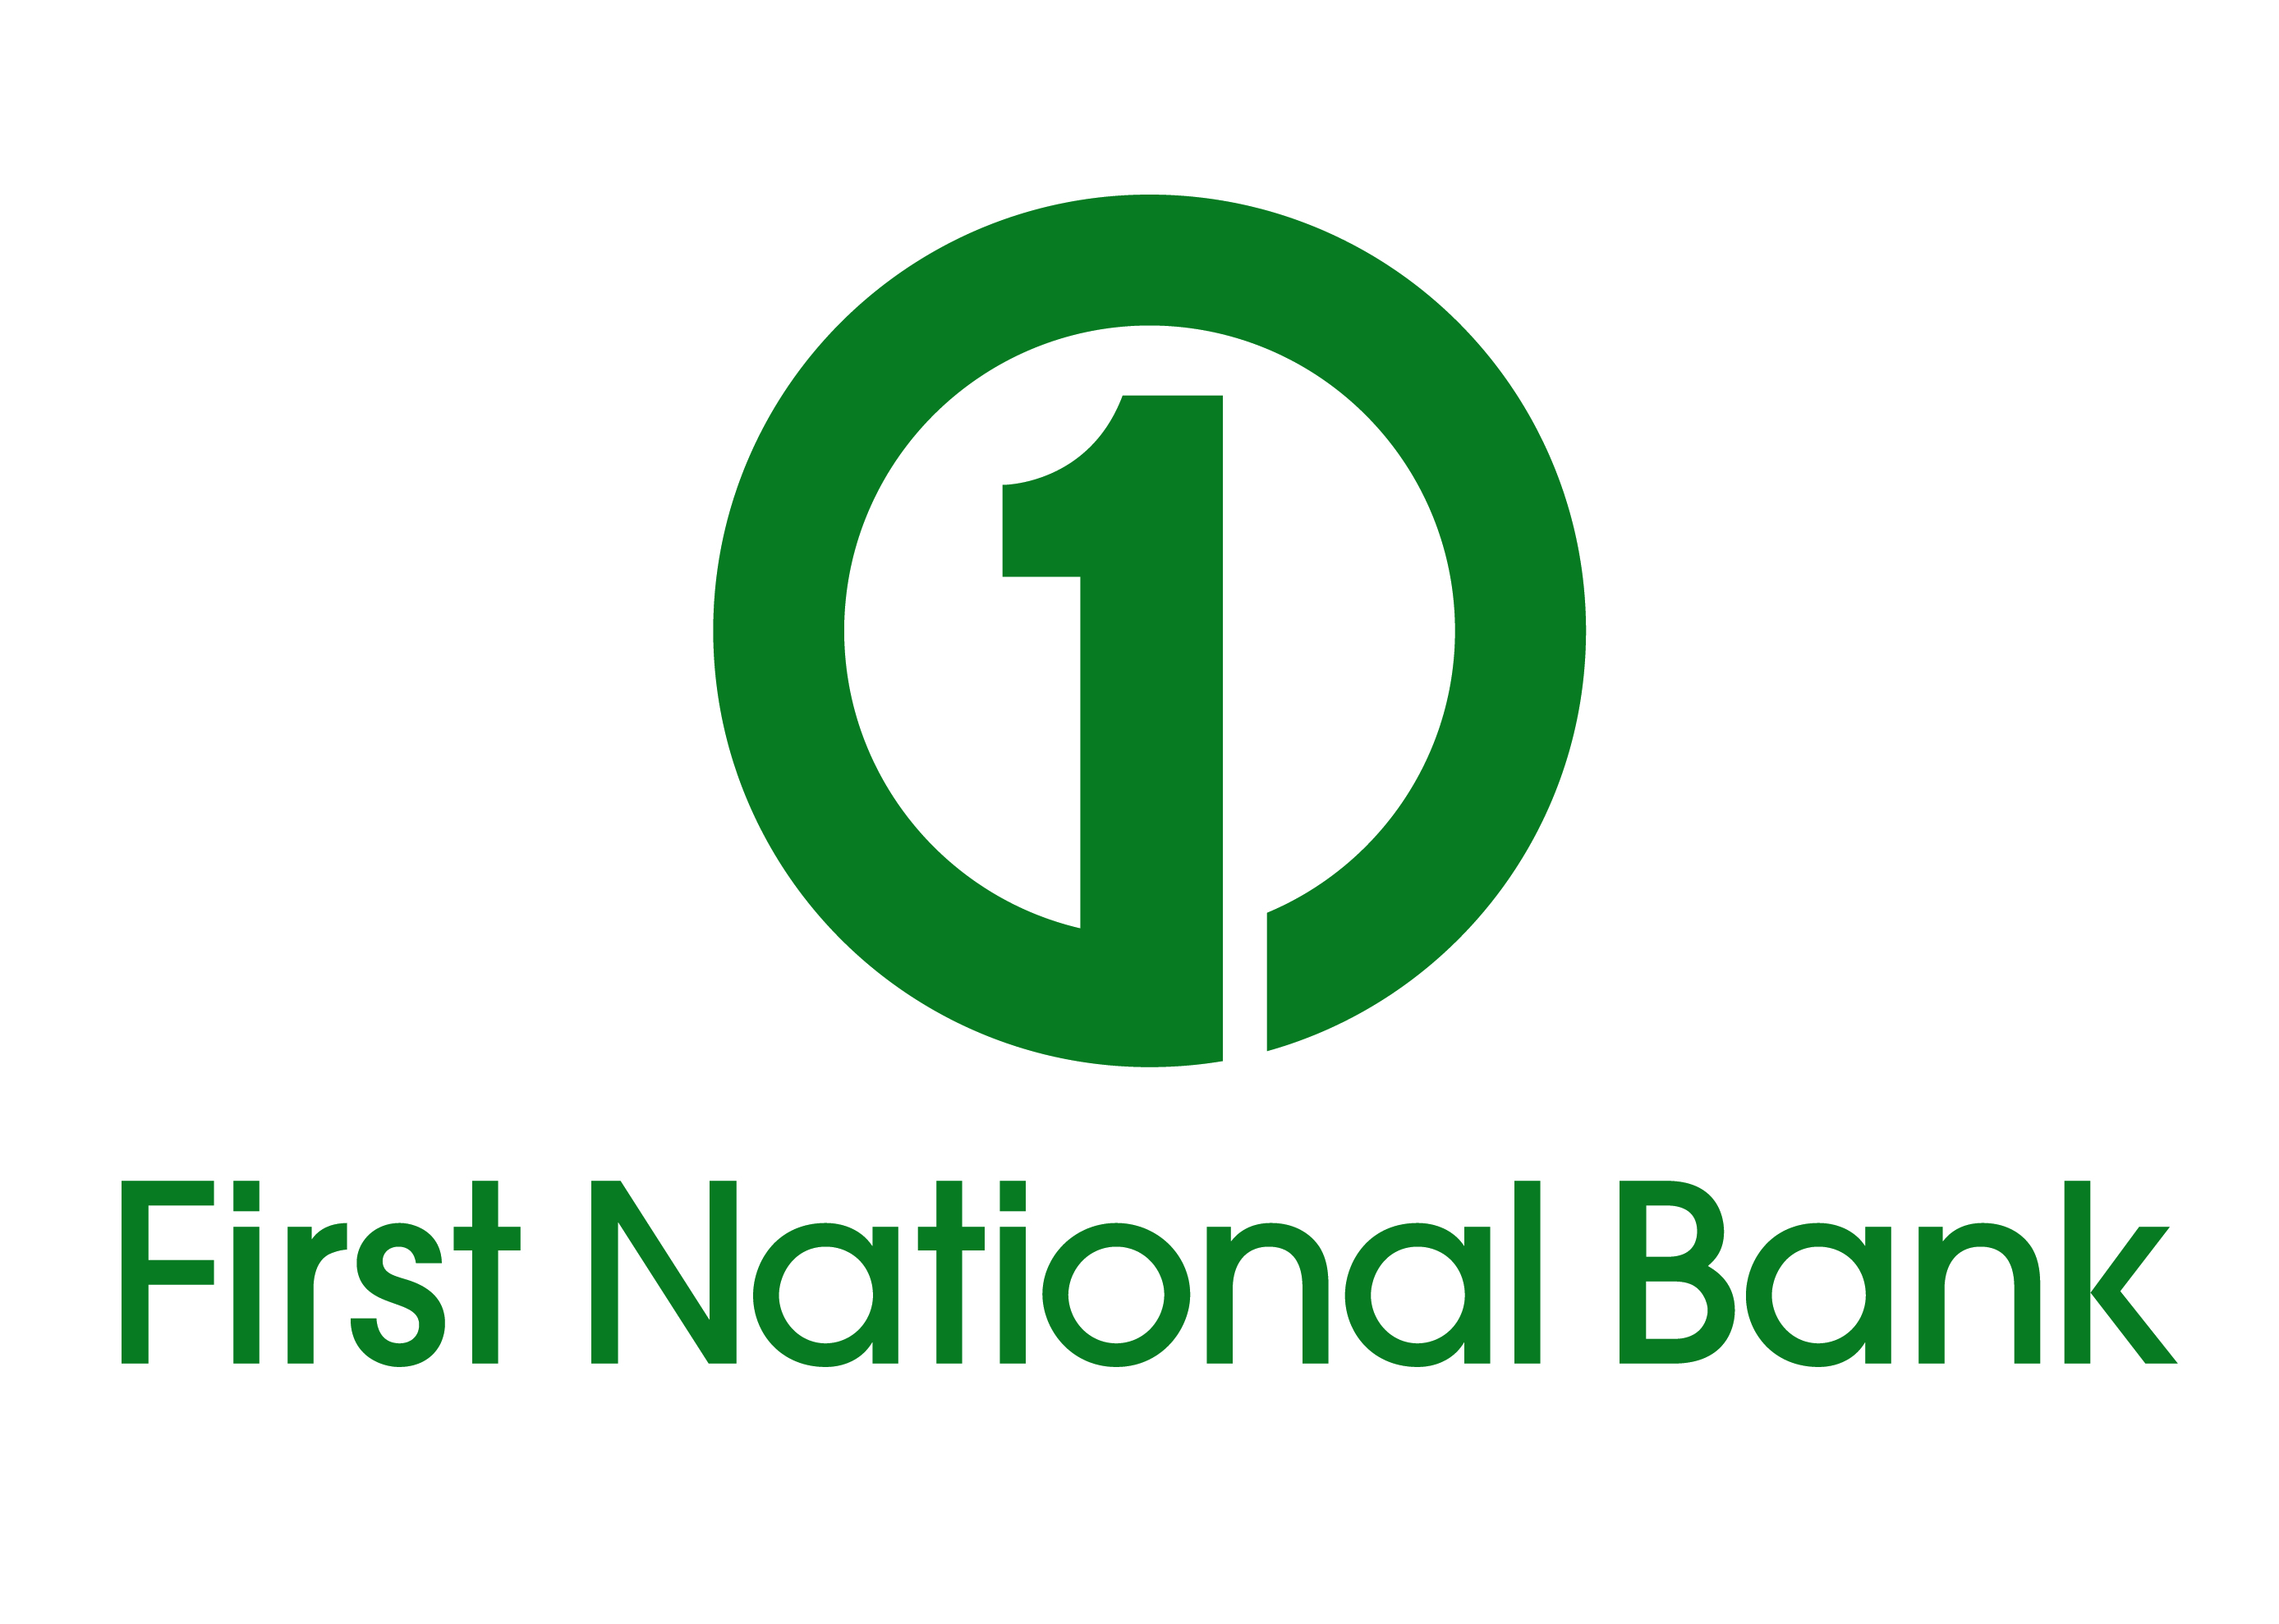 First National Bank - Homecare24